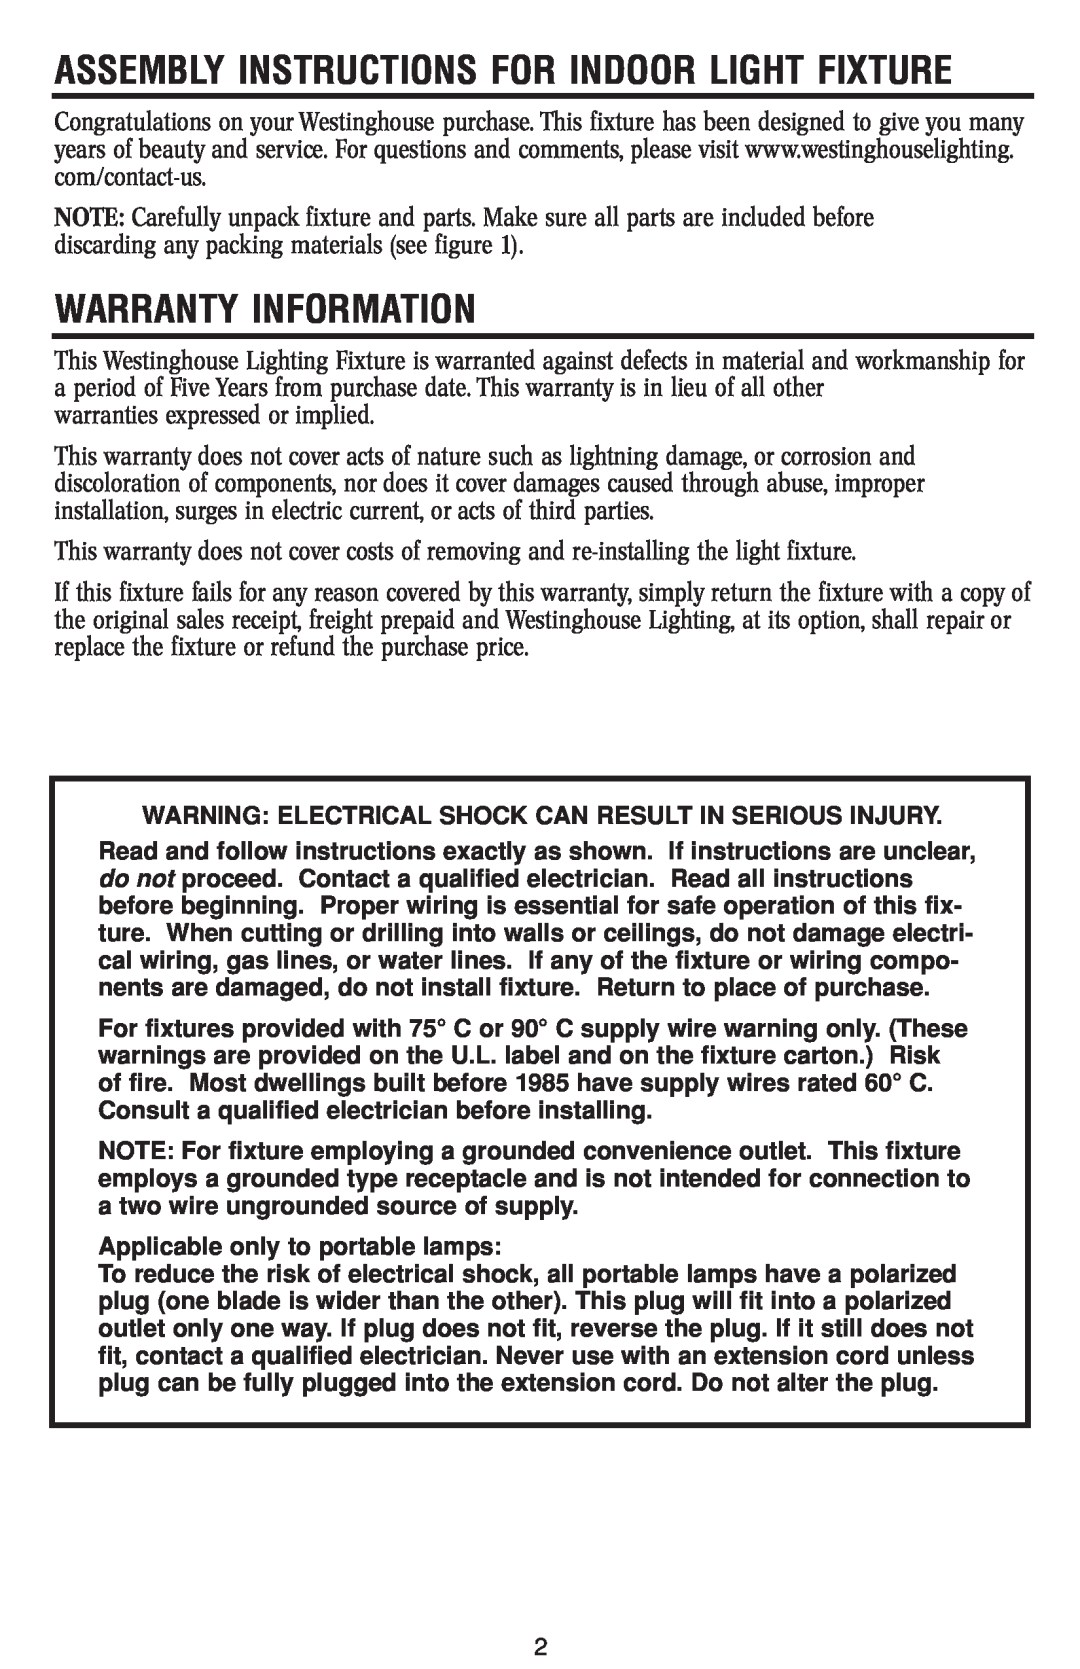 Westinghouse W-182 110712 owner manual Warranty Information, Assembly Instructions For Indoor Light Fixture 